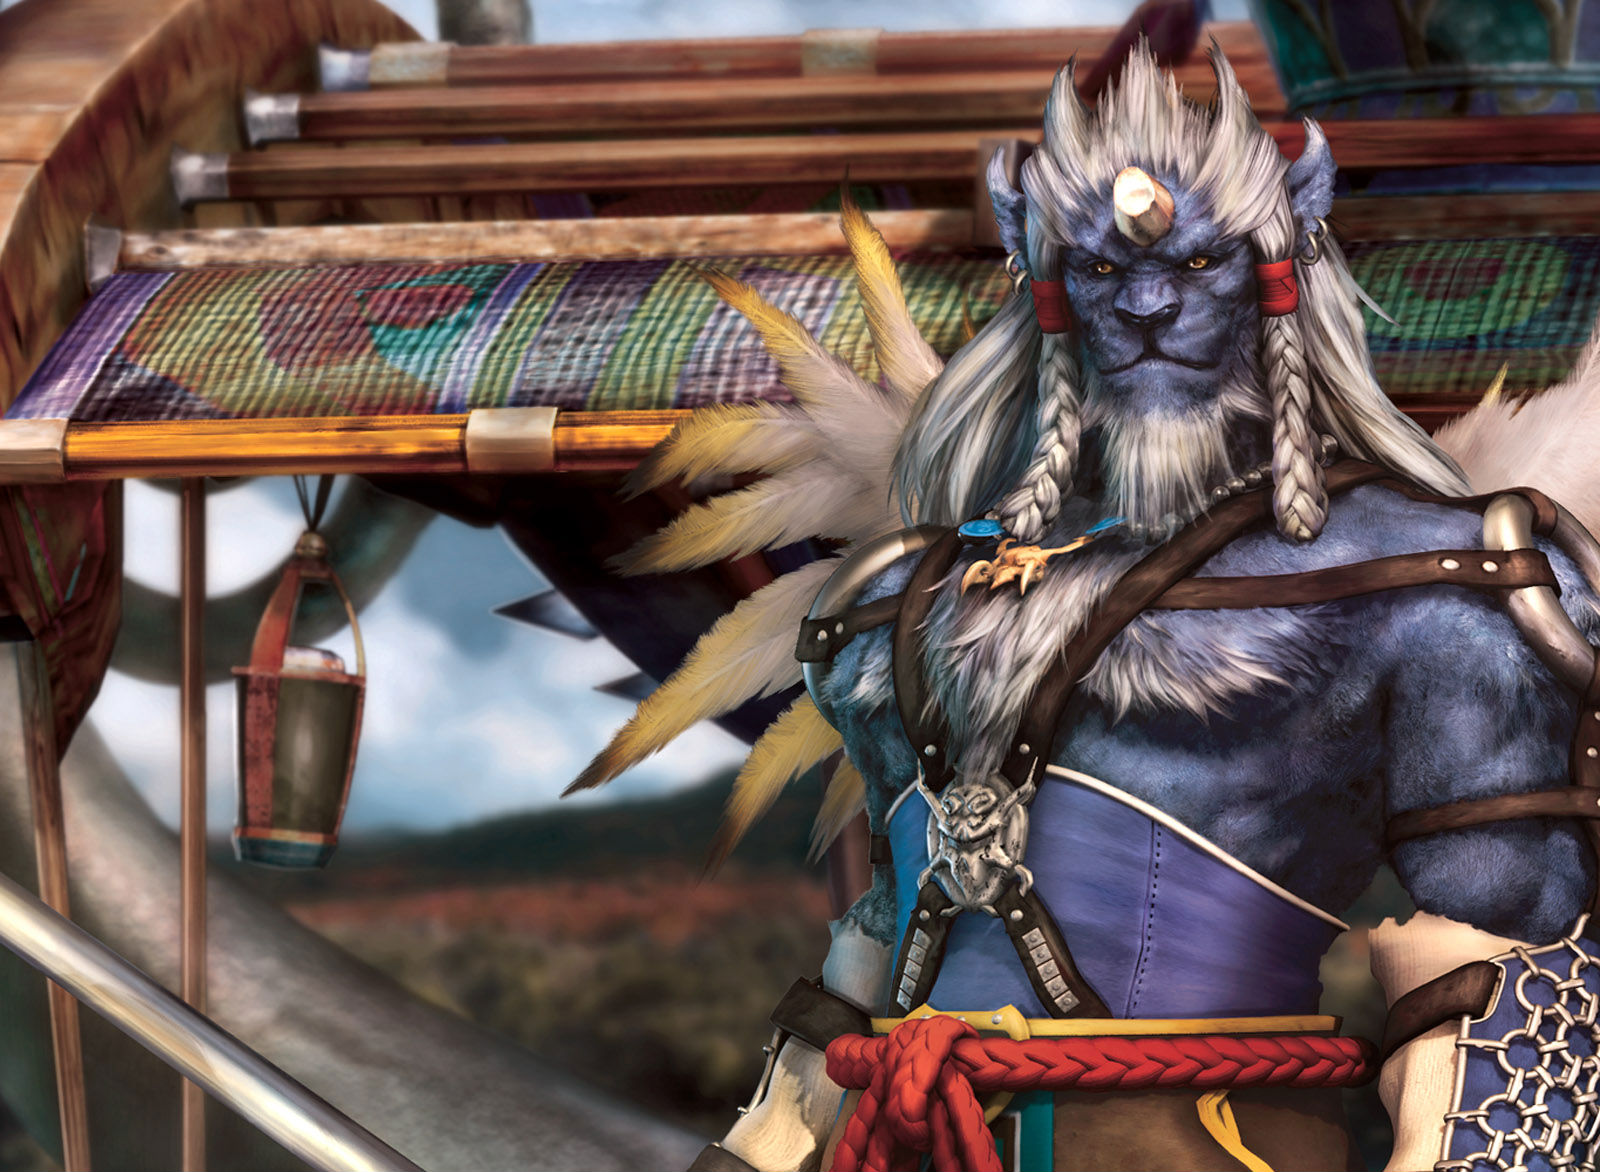 Video Game Final Fantasy X HD Wallpaper | Background Image